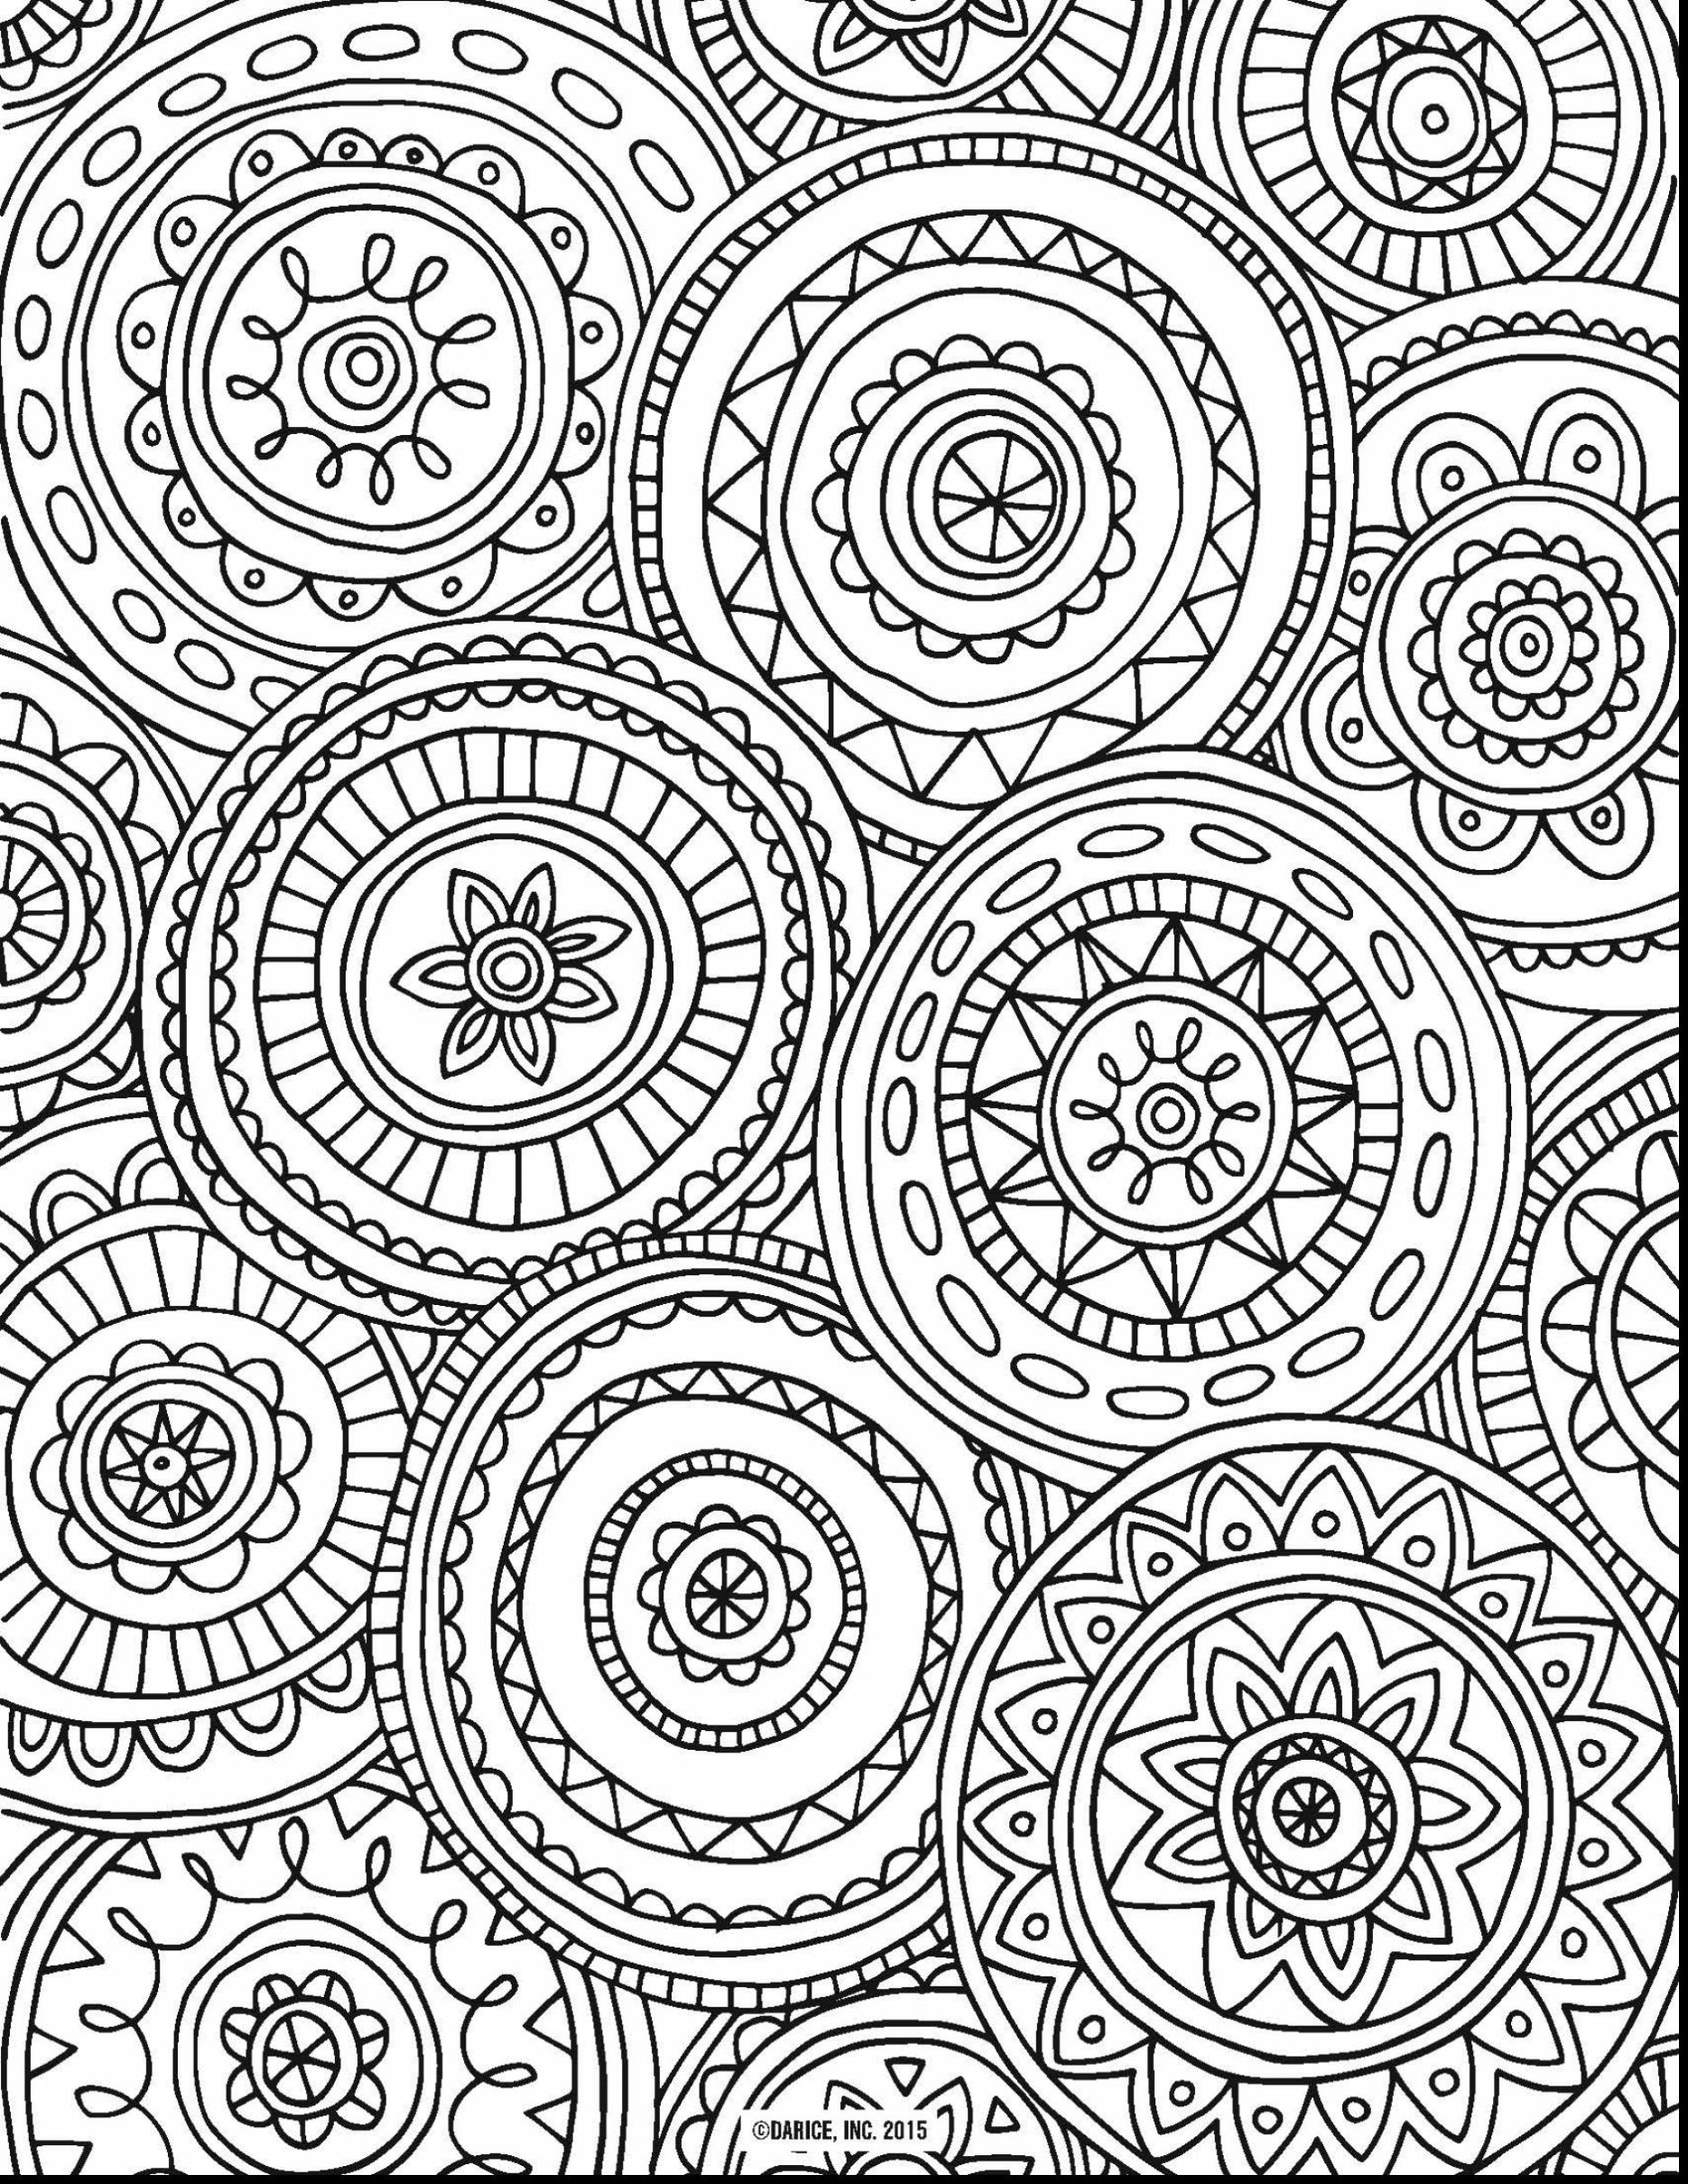 Coloring ~ Coloringalas For Adults To Print And Color Kids Free - Free Printable Coloring Designs For Adults